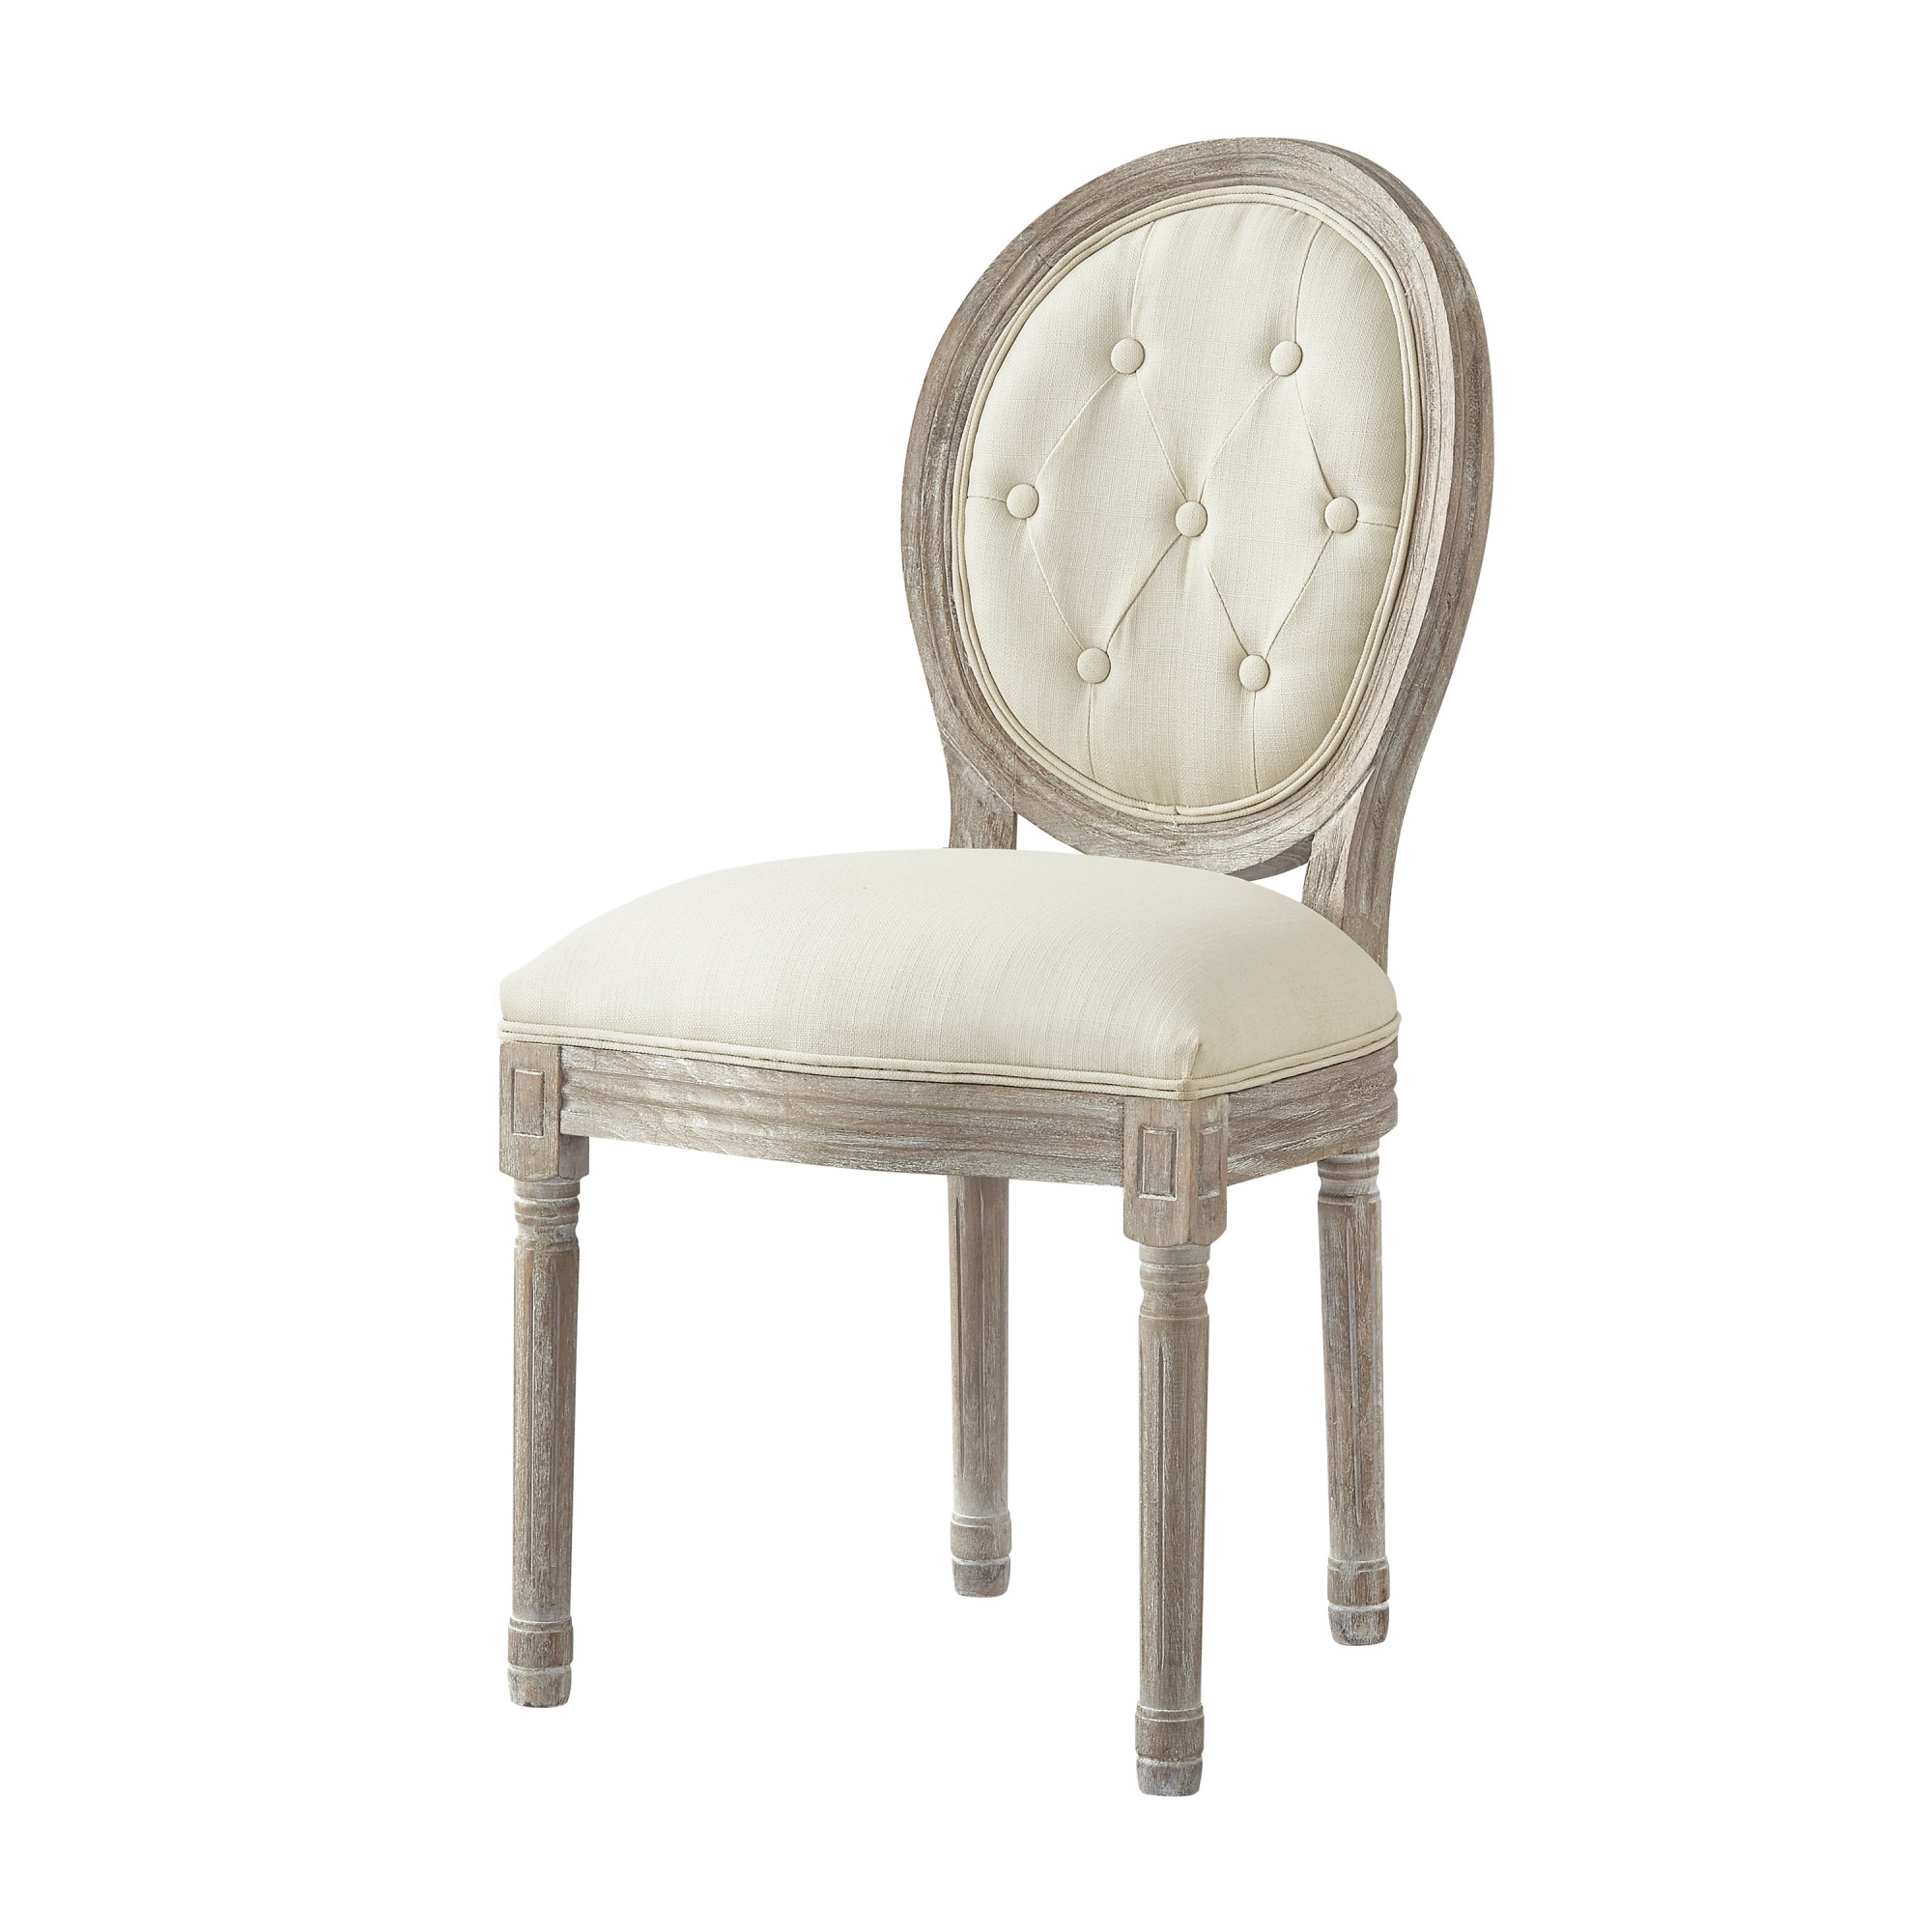 Tufted Cream and Brown Upholstered Linen Dining Side Chair-535367-1